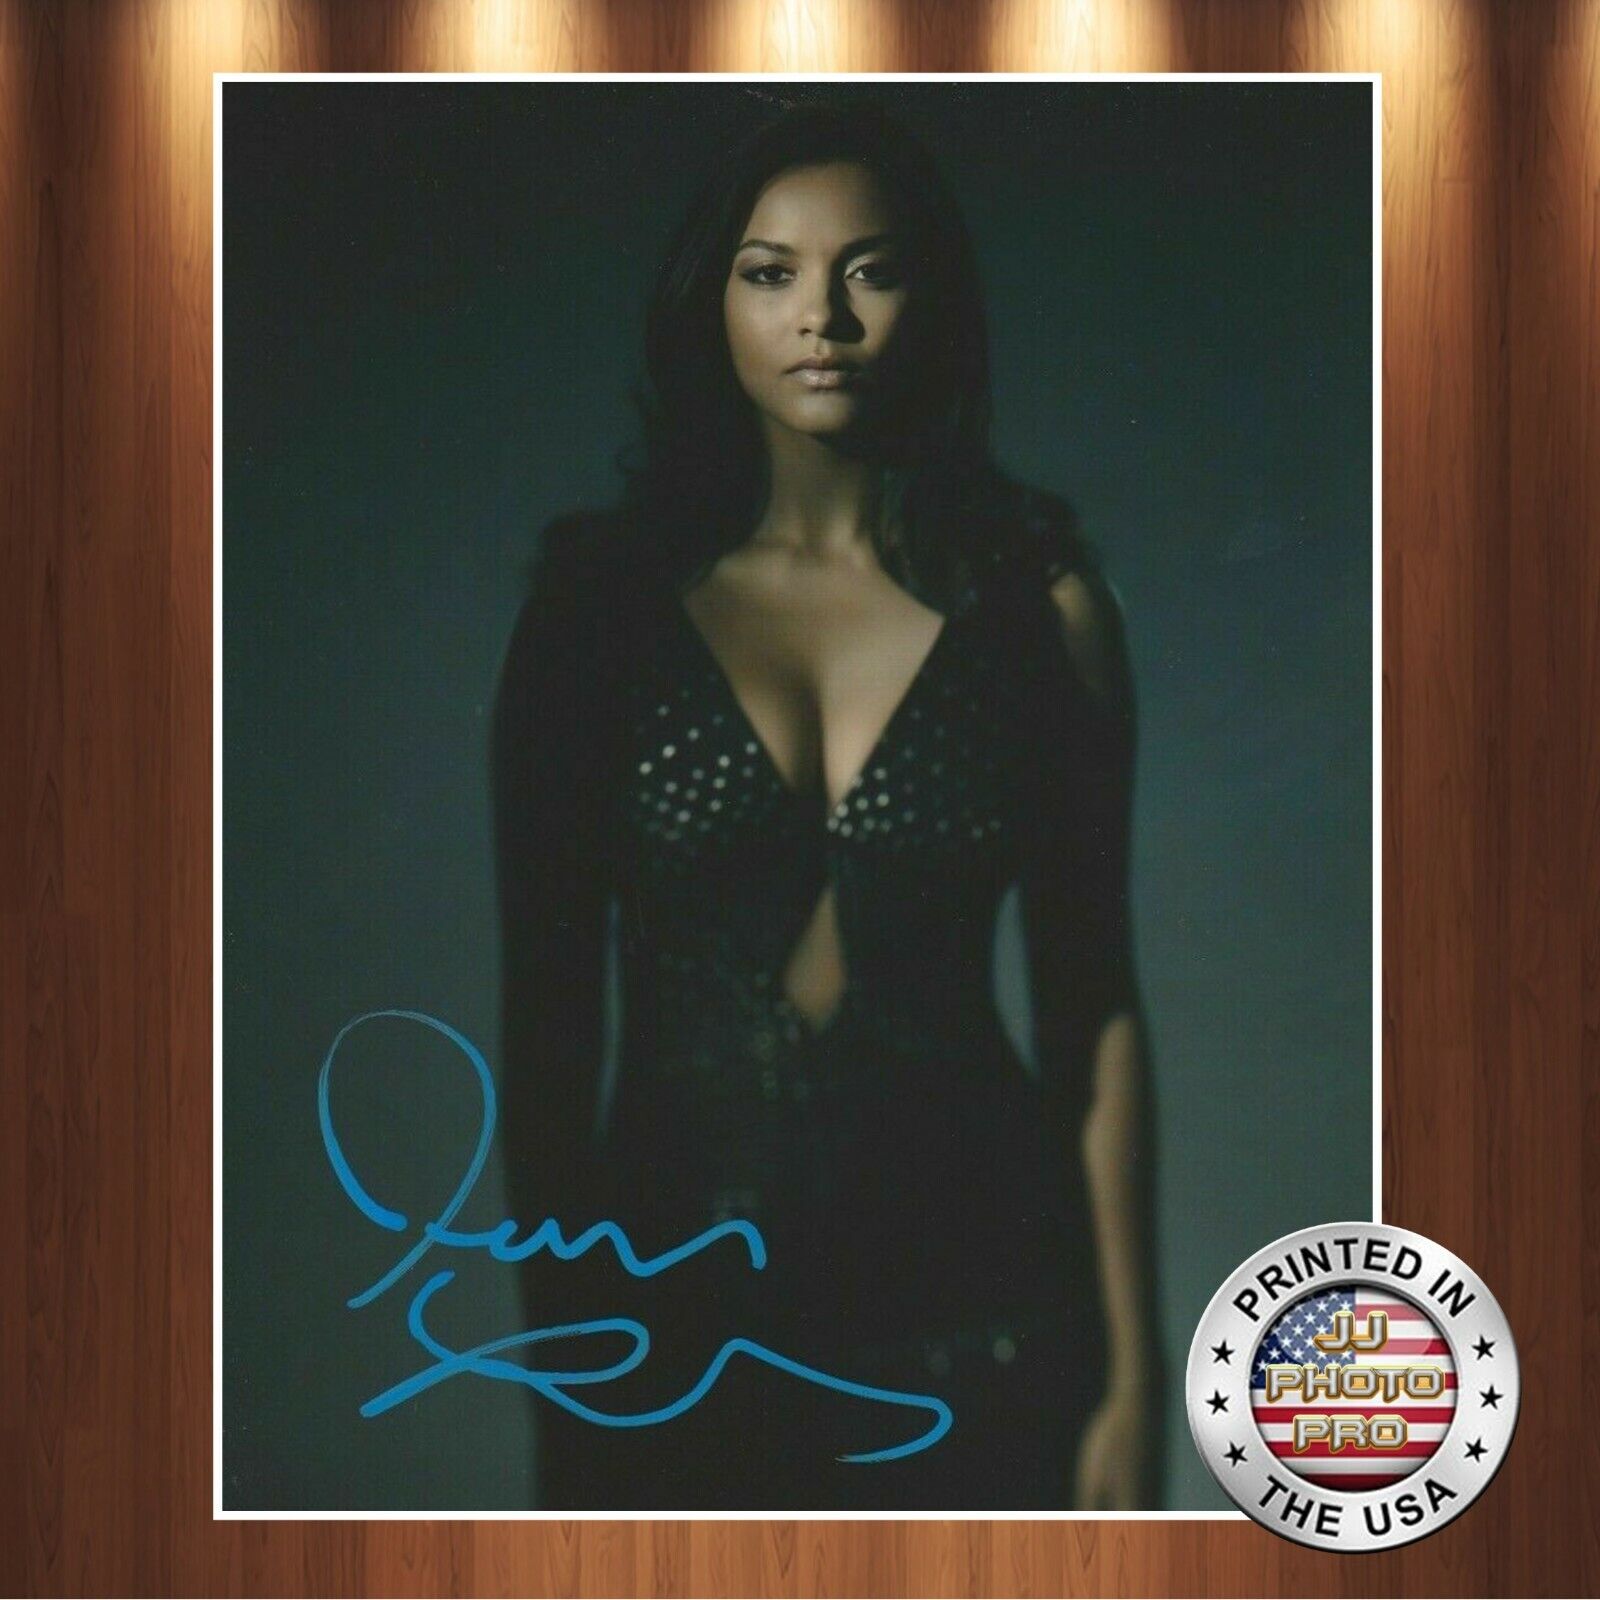 Jessica Lucas Autographed Signed 8x10 Photo Poster painting (Gotham) REPRINT